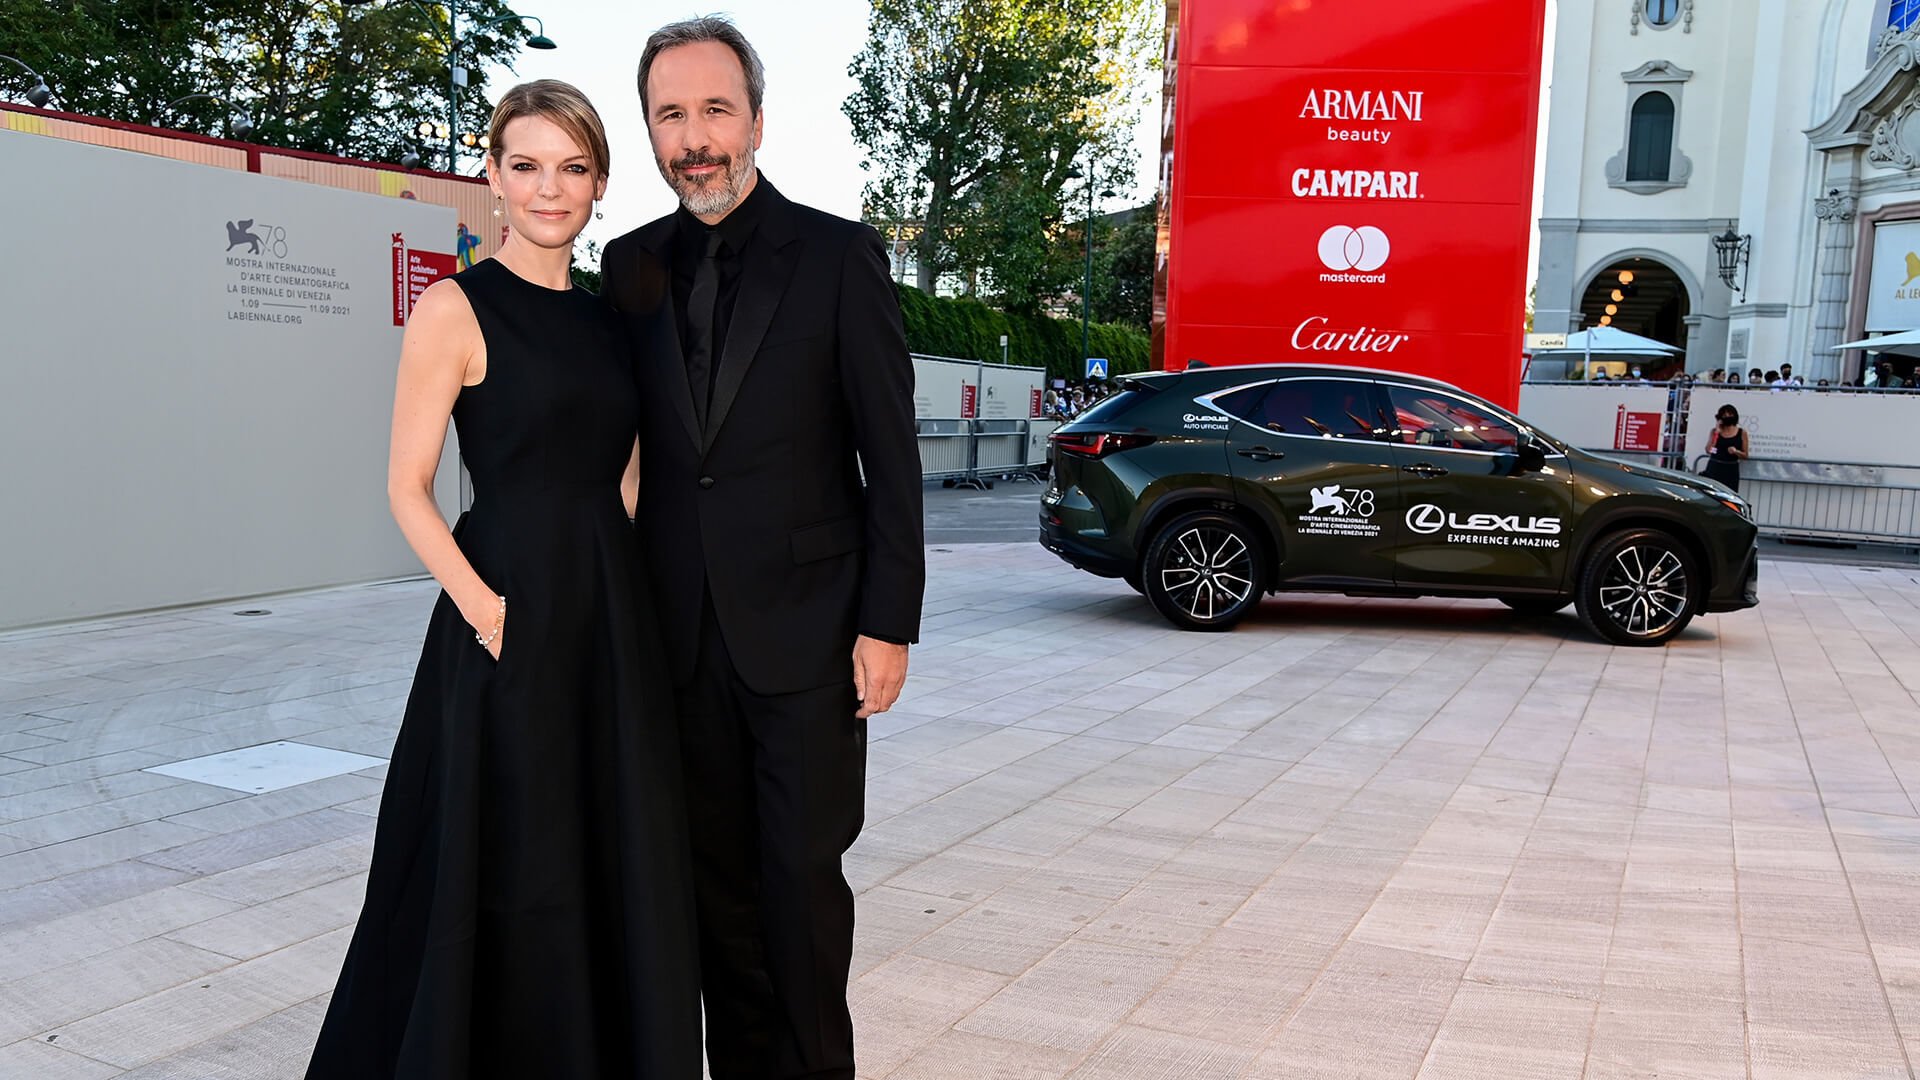 A male and female star at the 2021 Venice Film Festival 